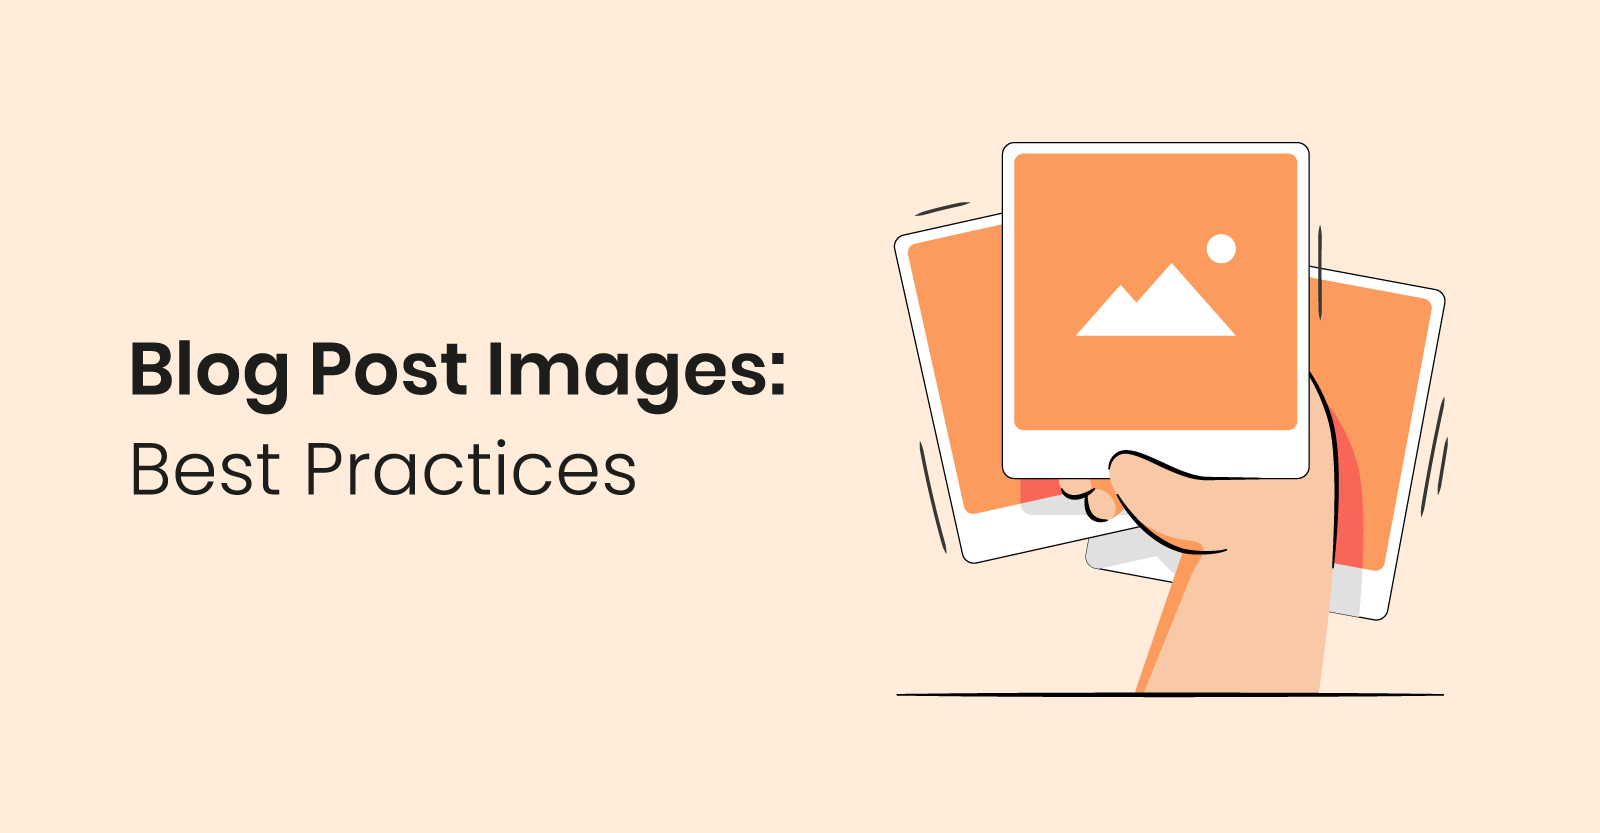 Blog Post Images: Why You Need Them & Where to Find Them